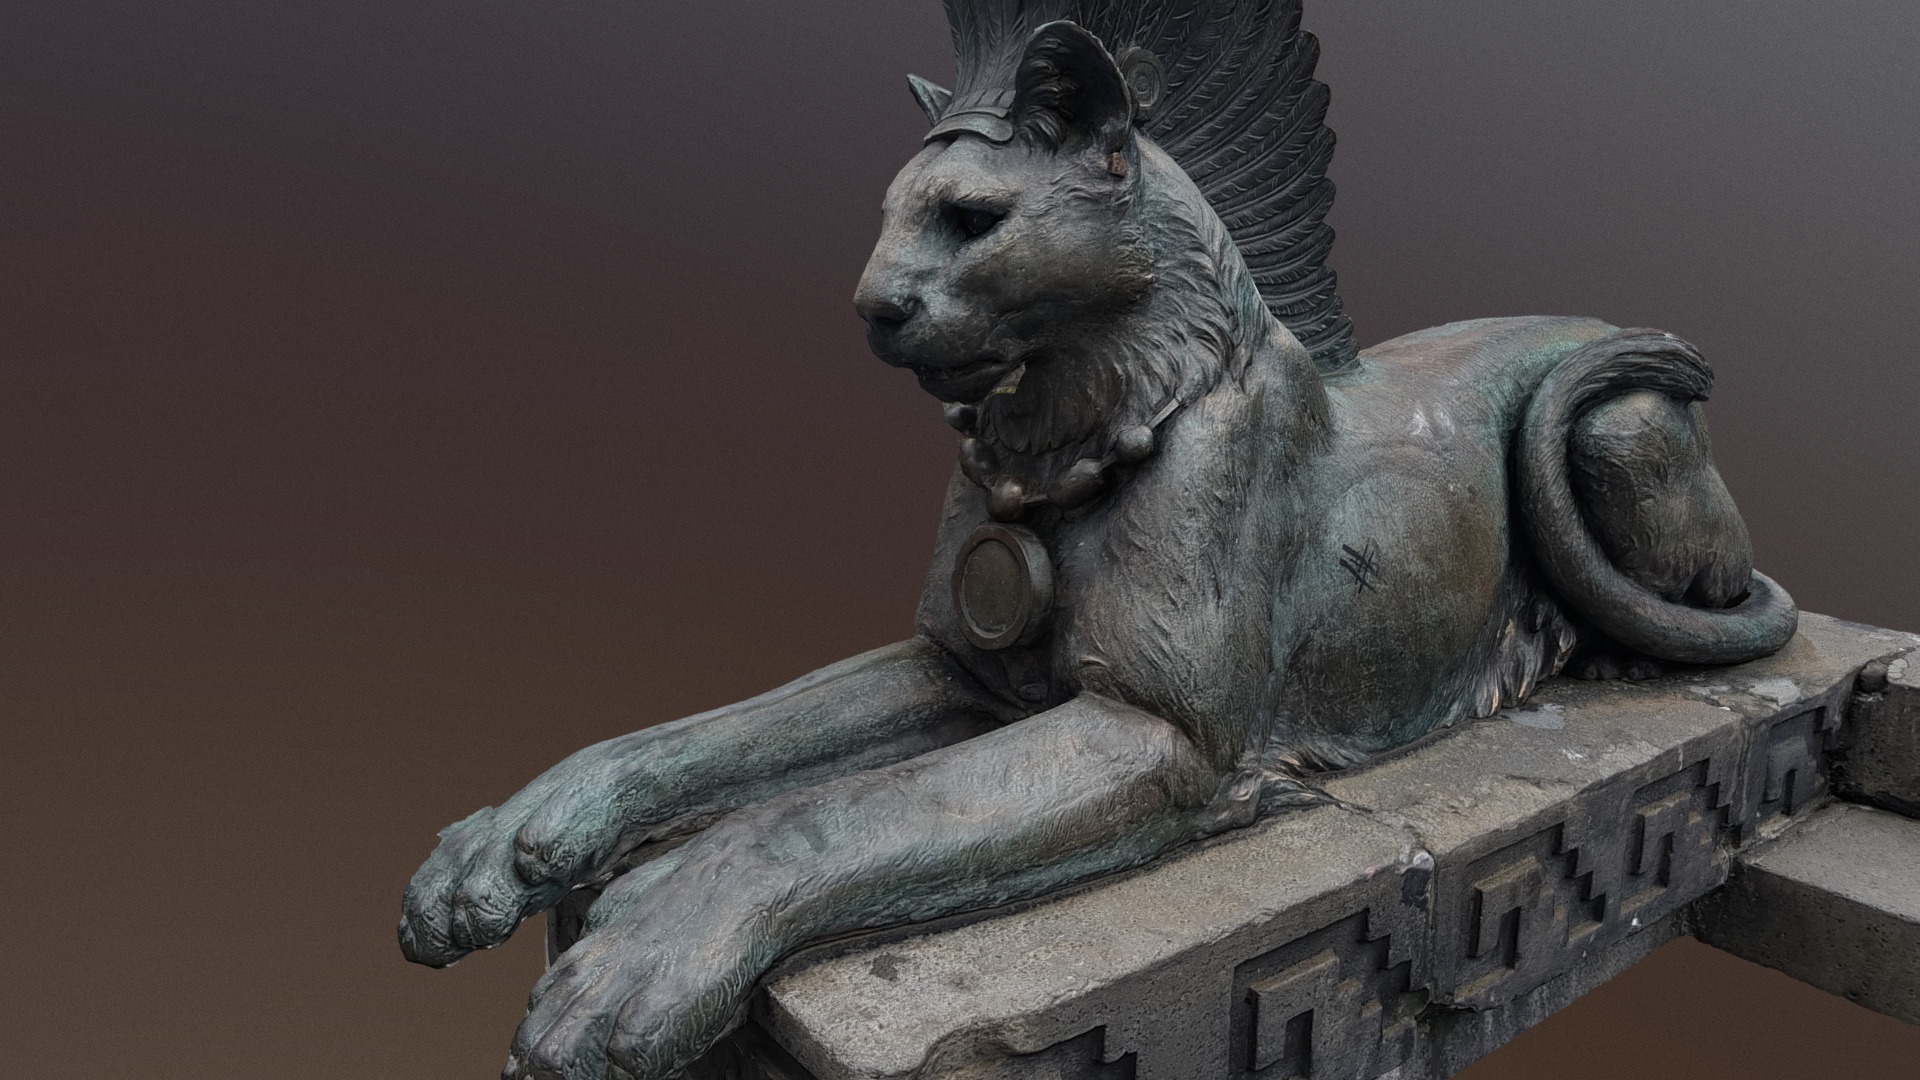 3D model Lion on the monument to Cuauhtémoc, Mexico City - This is a 3D model of the Lion on the monument to Cuauhtémoc, Mexico City. The 3D model is about a statue of a lion.